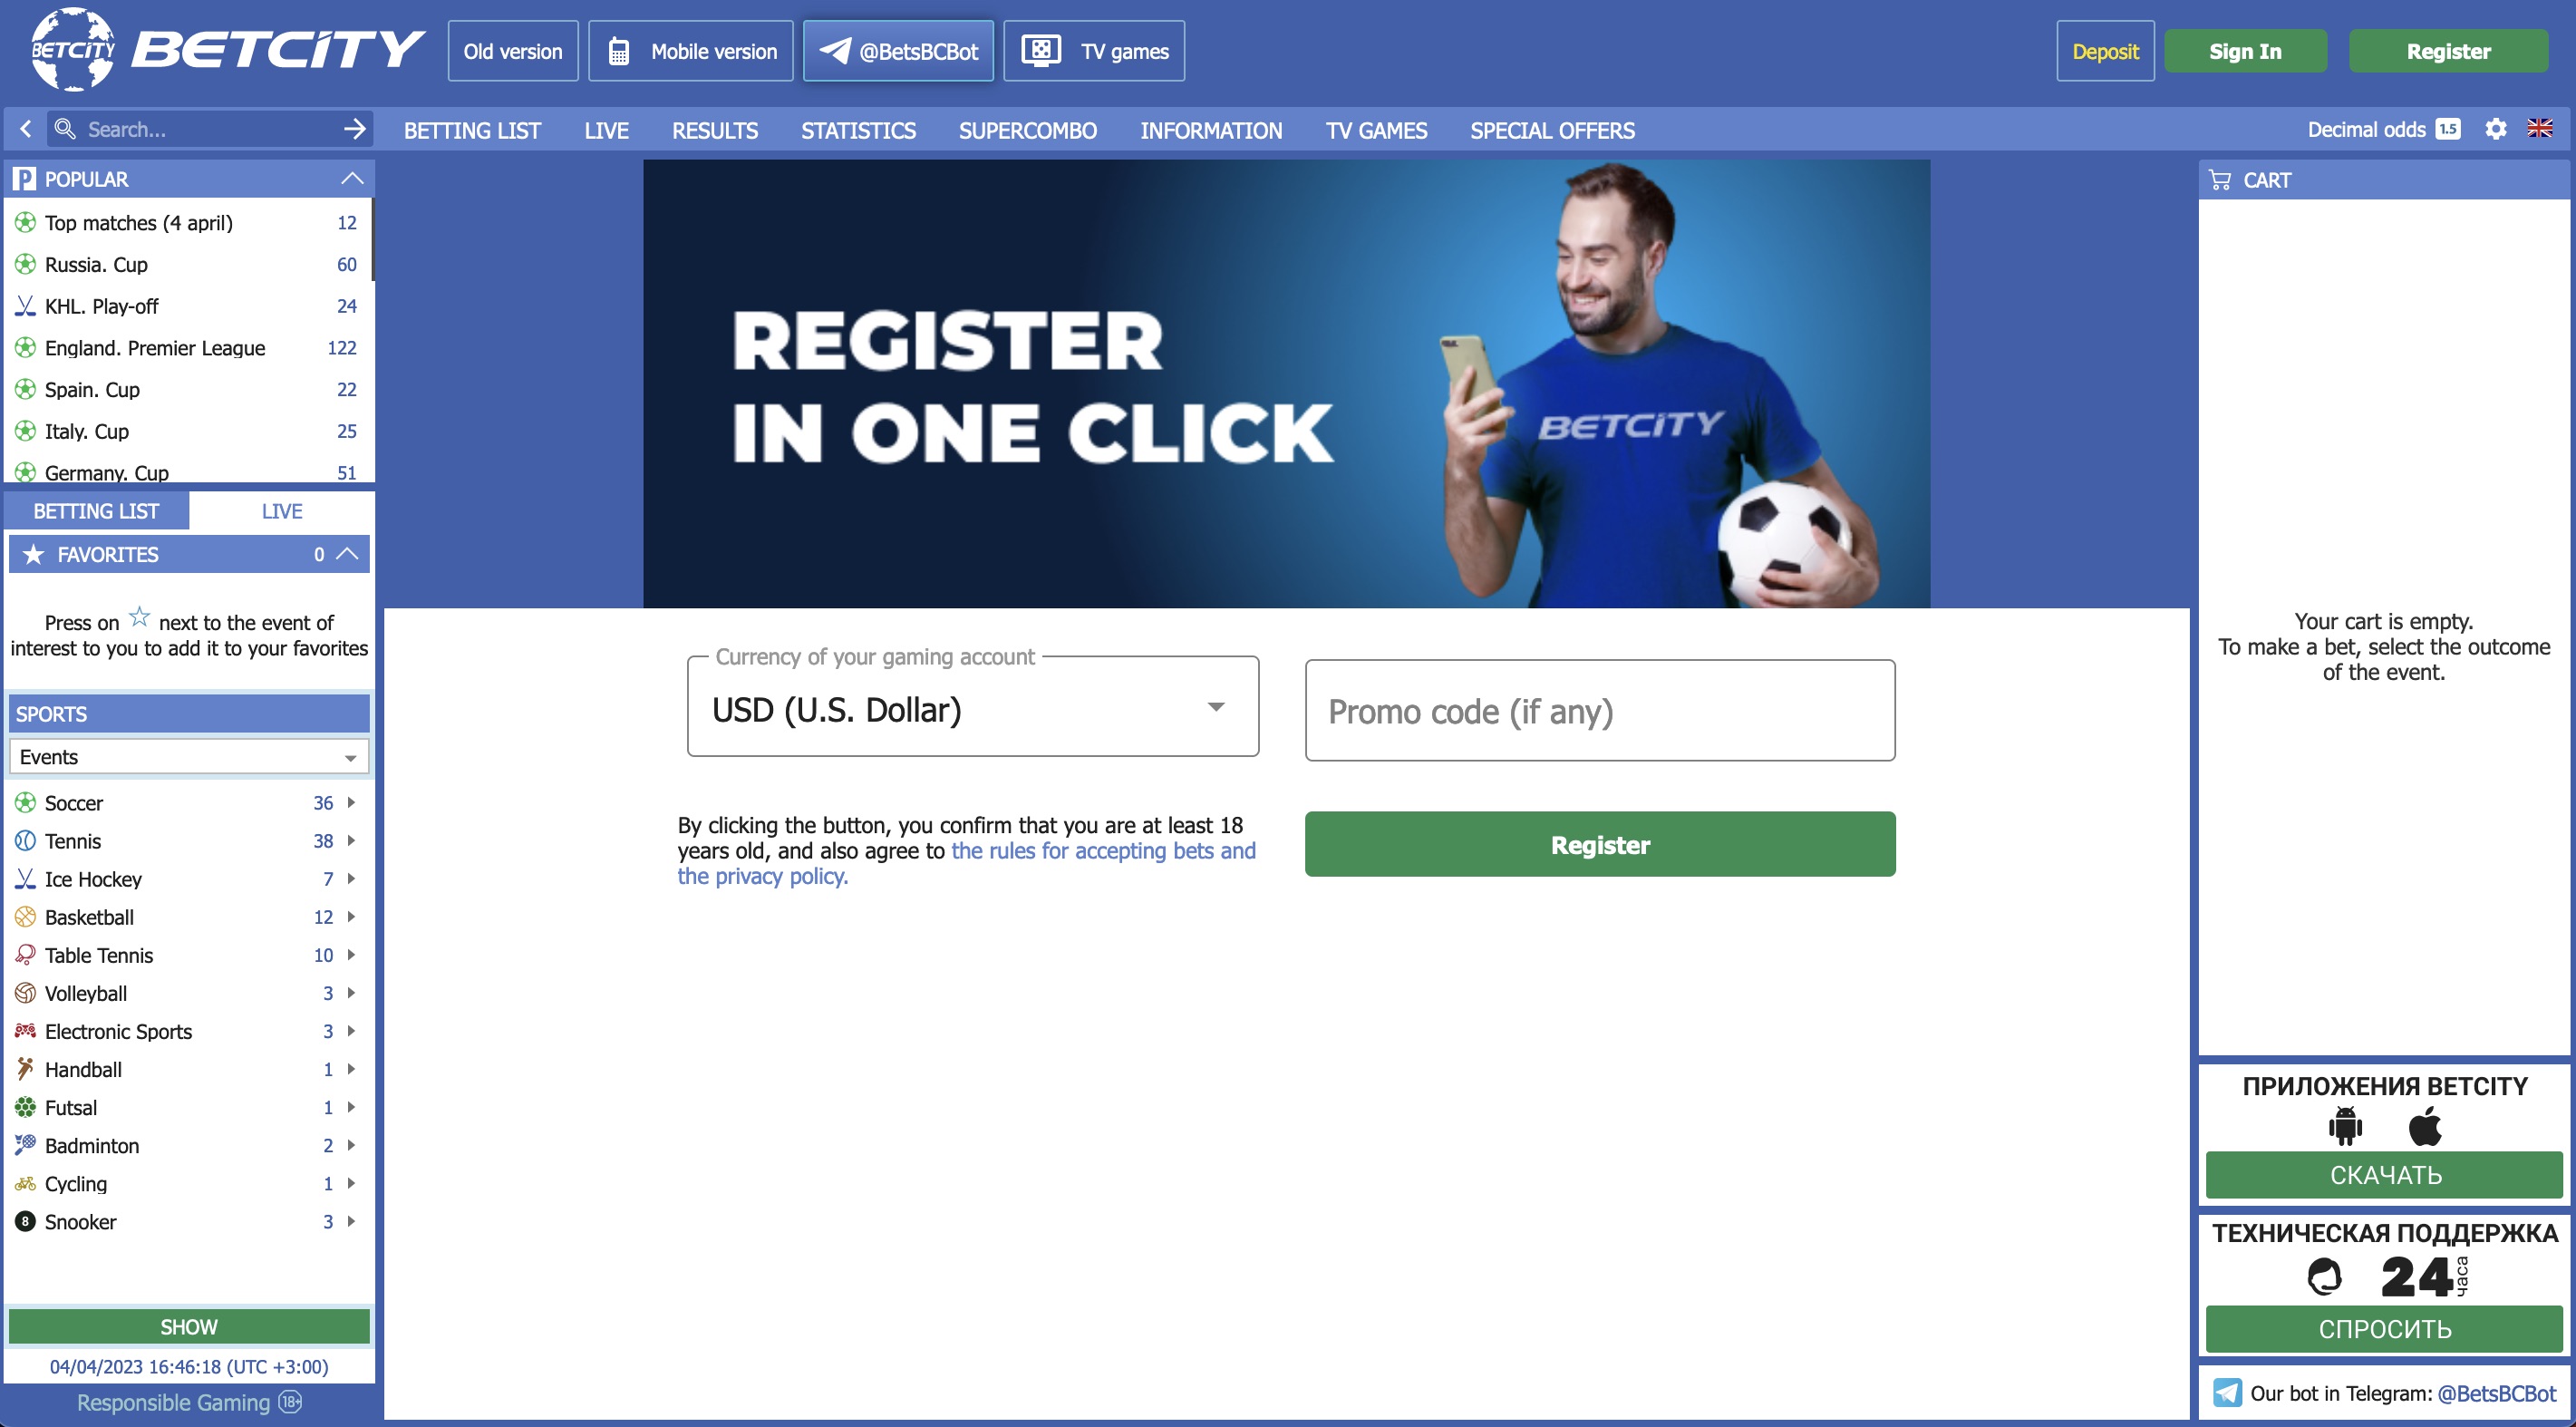 Registration on the official Betcity website